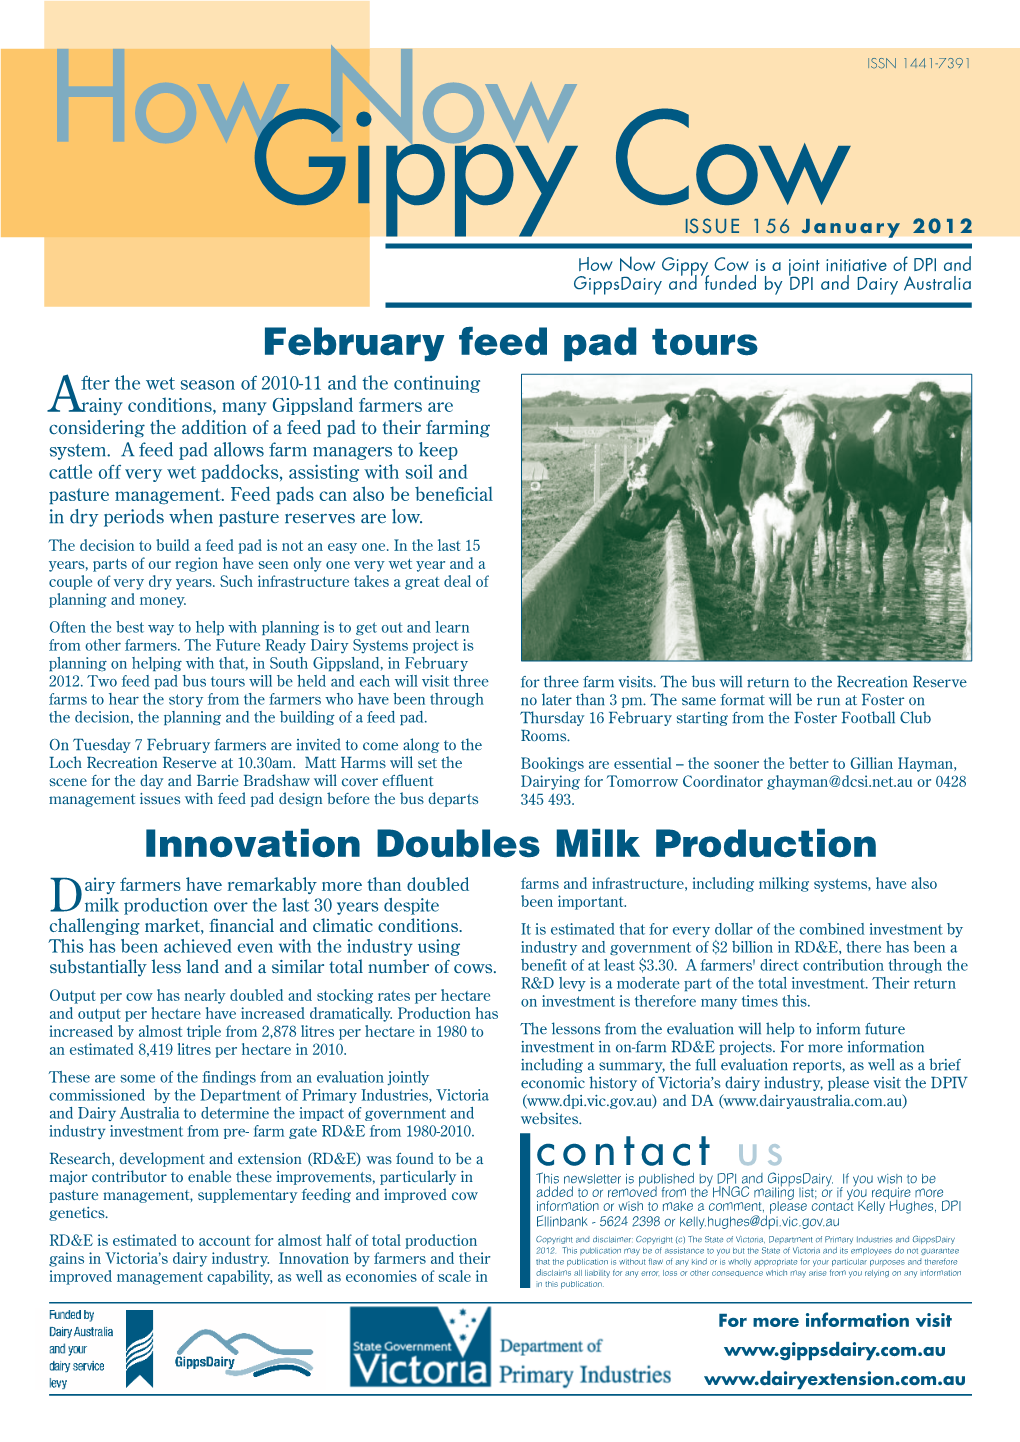 Contact Us Major Contributor to Enable These Improvements, Particularly in This Newsletter Is Published by DPI and Gippsdairy